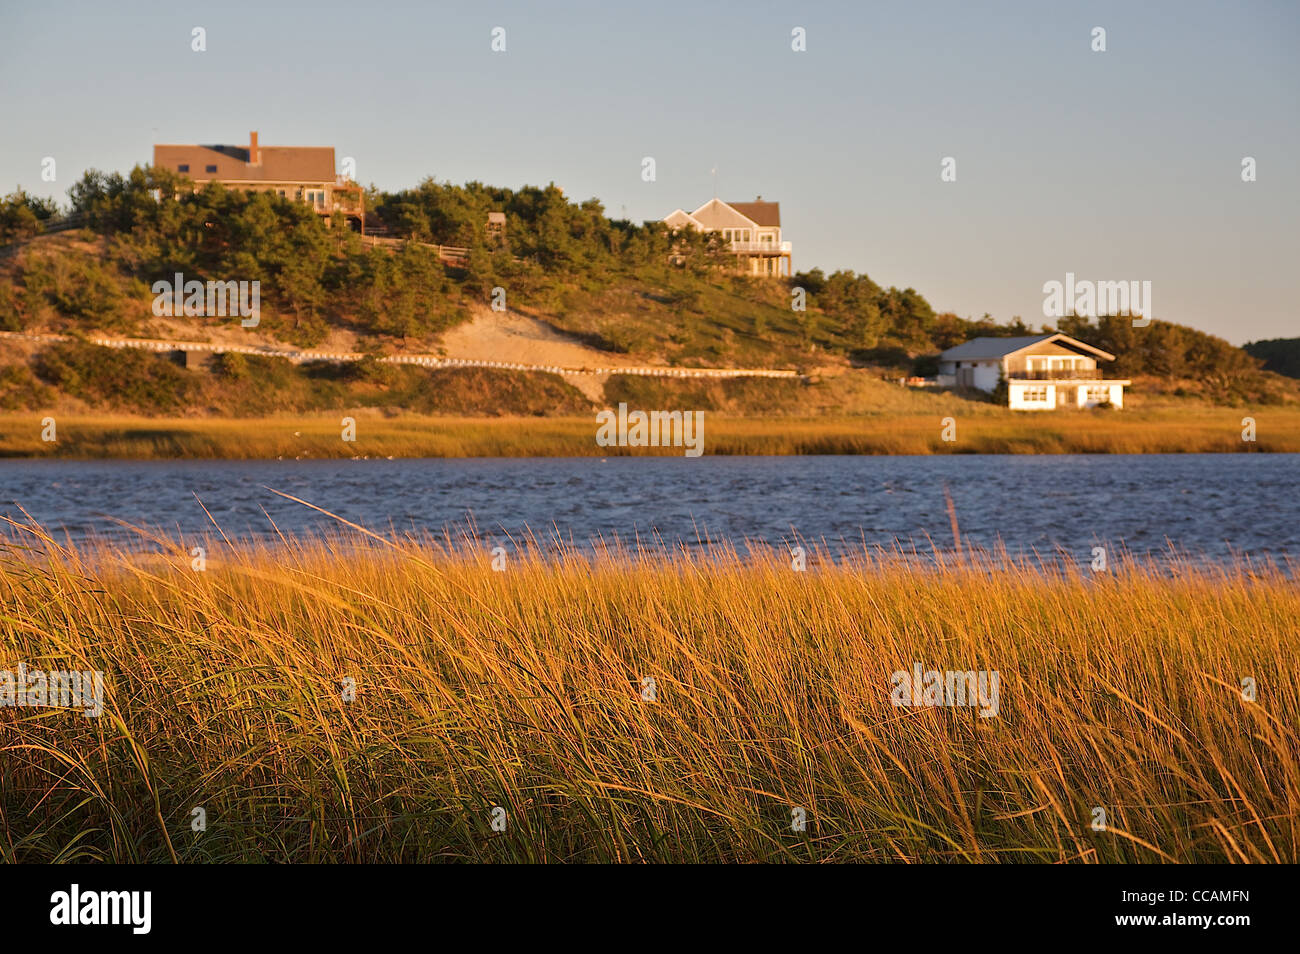 An autumn view of wetlands and water, homes in the background, Welfleet, Massachusetts, United States Stock Photo